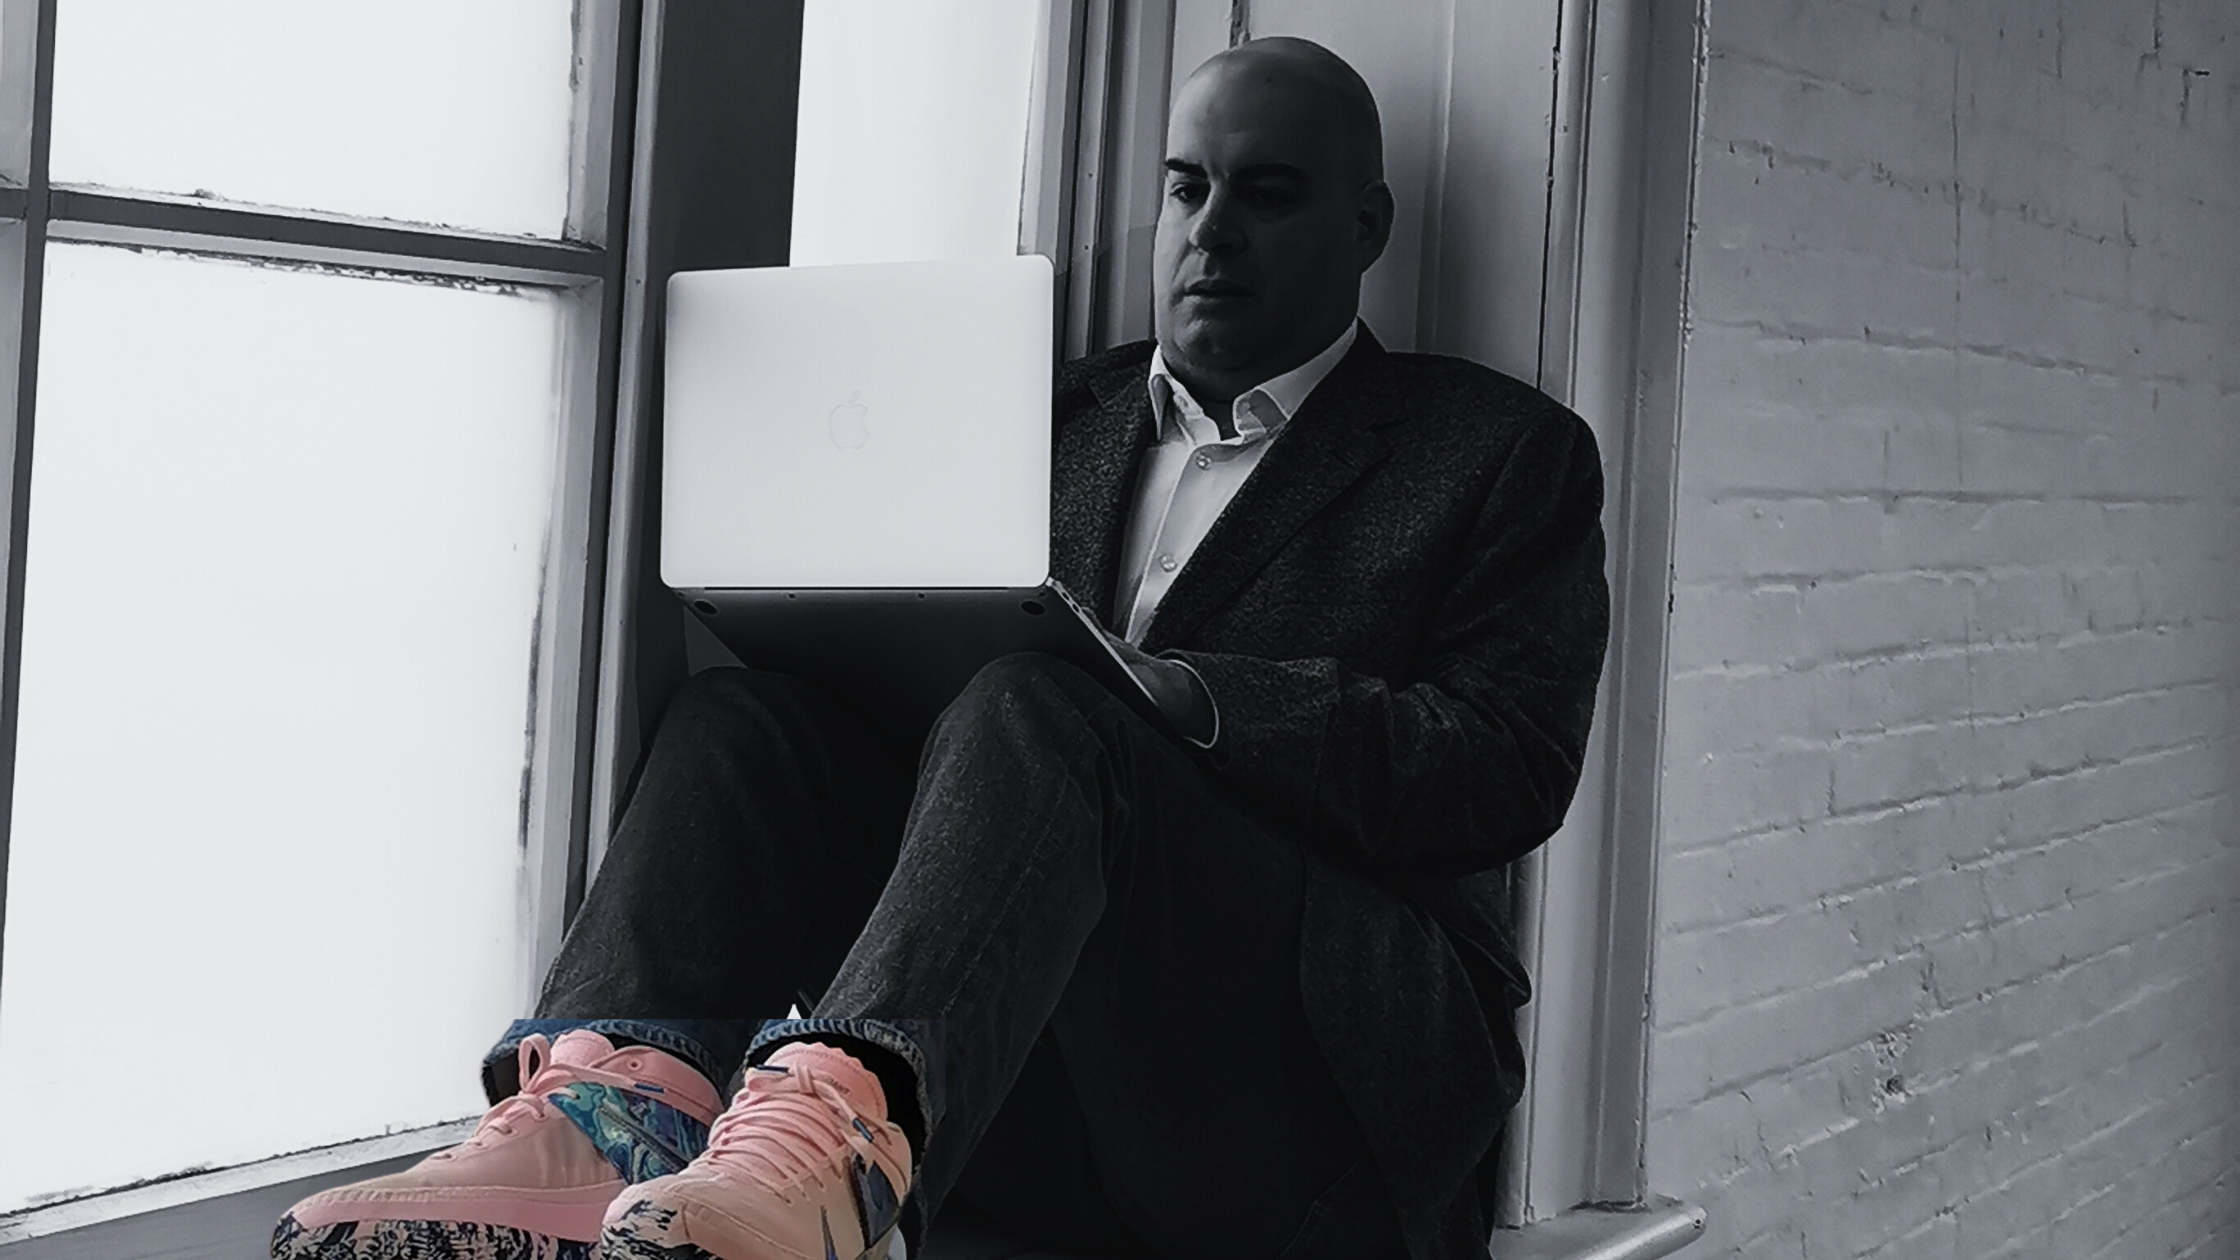 Man sitting on a window sill using a laptop computer. His shoes are pink.